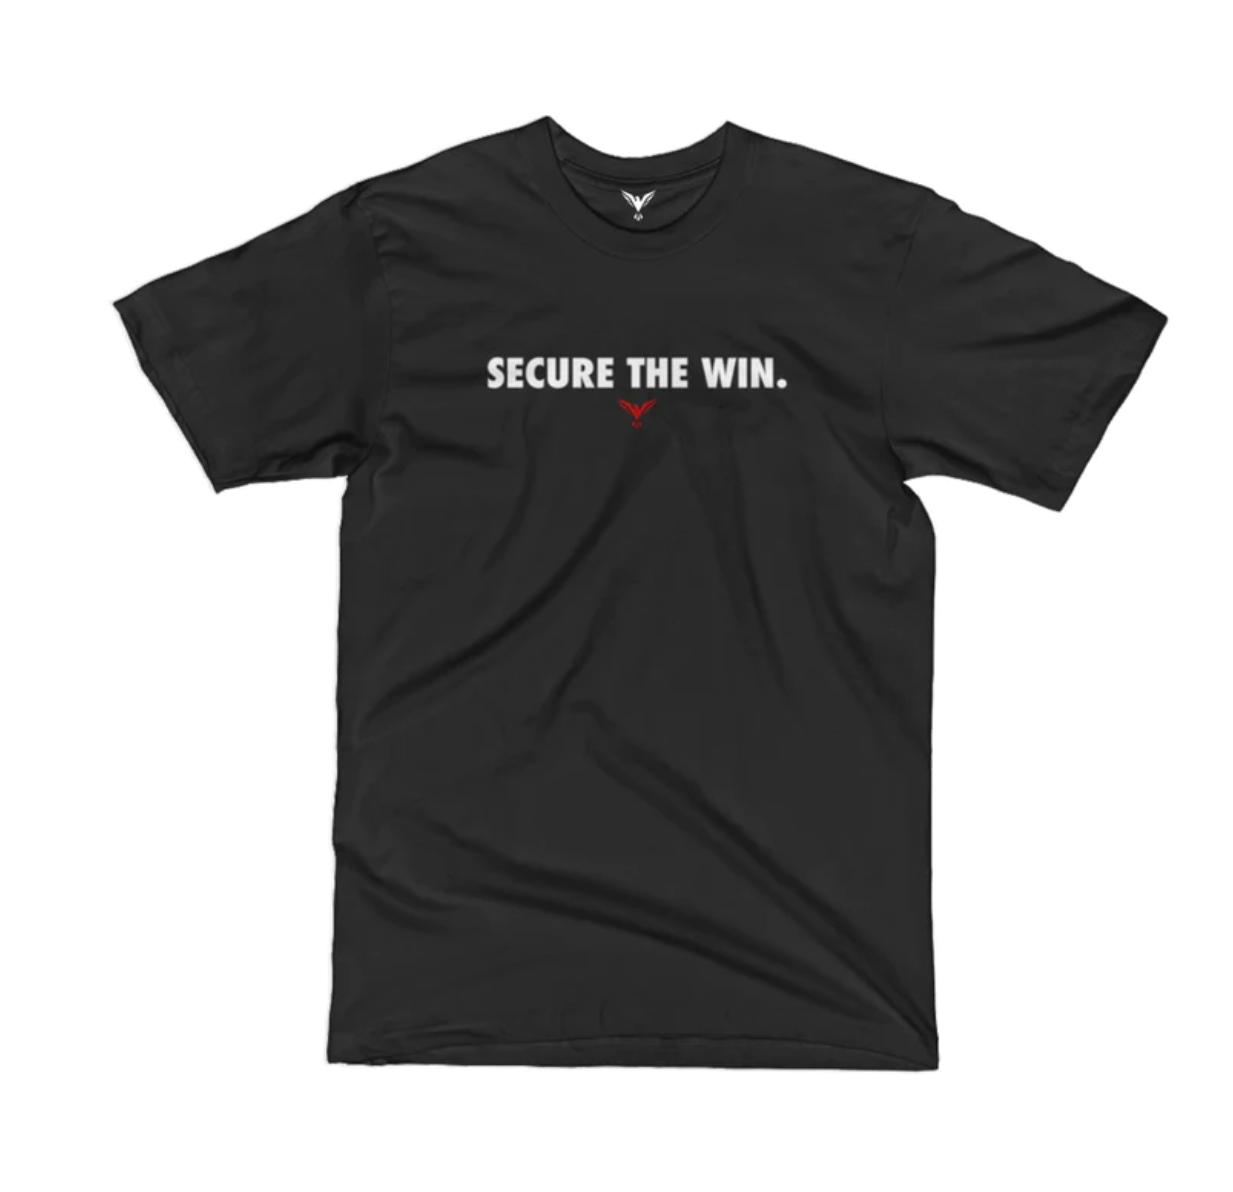 Secure The Win. TeeProudly Designed In Atlanta, GA - The Secure The Win Classic Tee features the classic Win. Logo on 100% Cotton fabric to help keep you comfortable. Fits true to sizeWin. BrandSecure